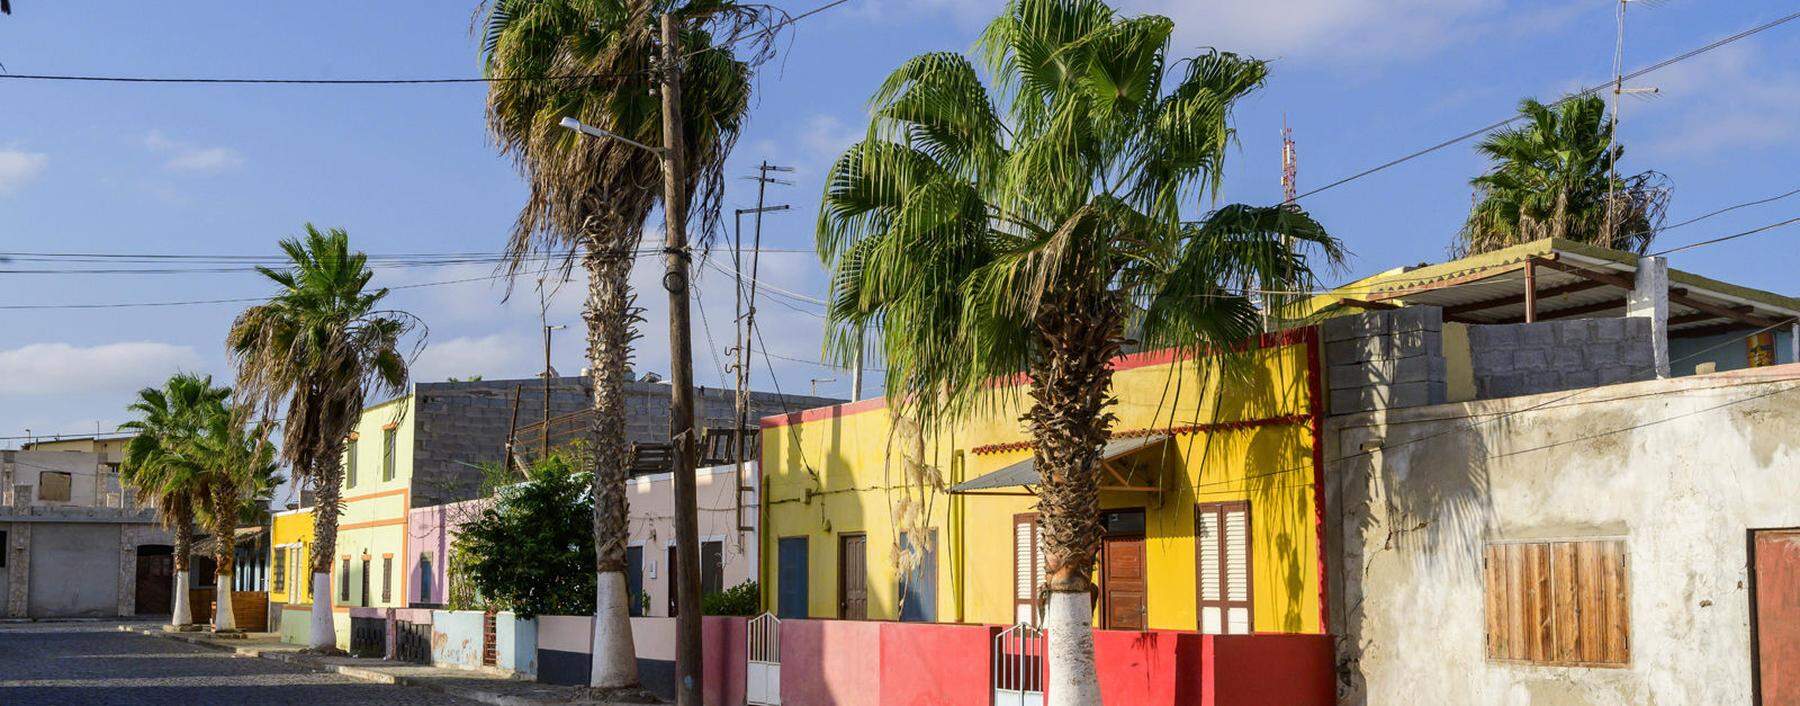 Bunte H�user und Palmen an einer Stra�e, Palmeira, Insel Sal, Kapverden *** Colorful houses and palm trees on a street,